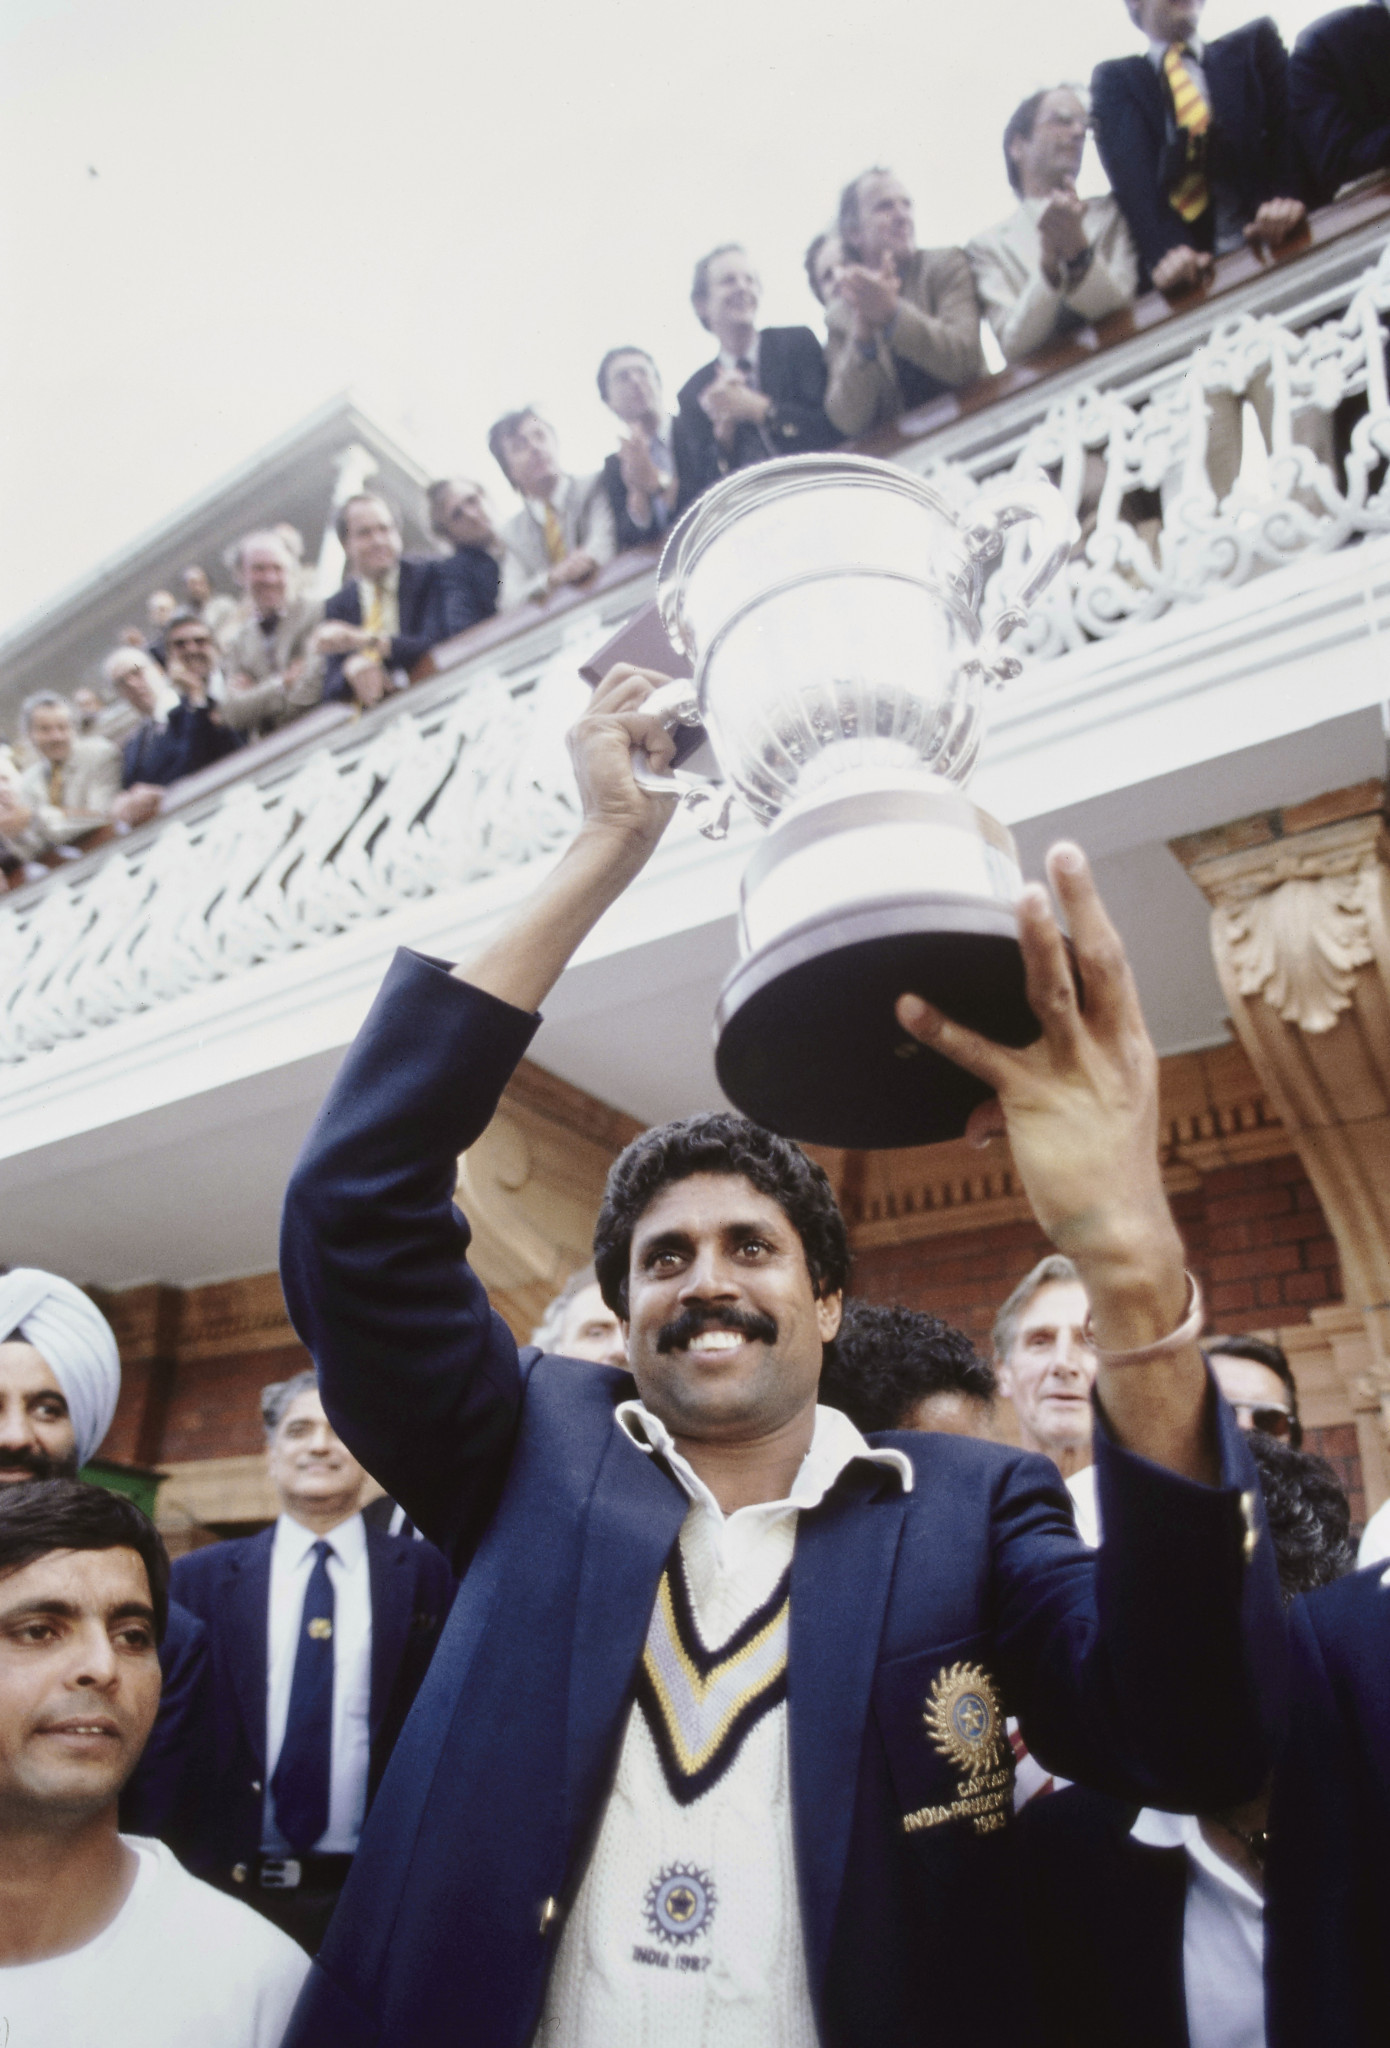 Kapil Dev lifted the Prudential Cup on the balcony at Lord's cricket ground ©Getty Images